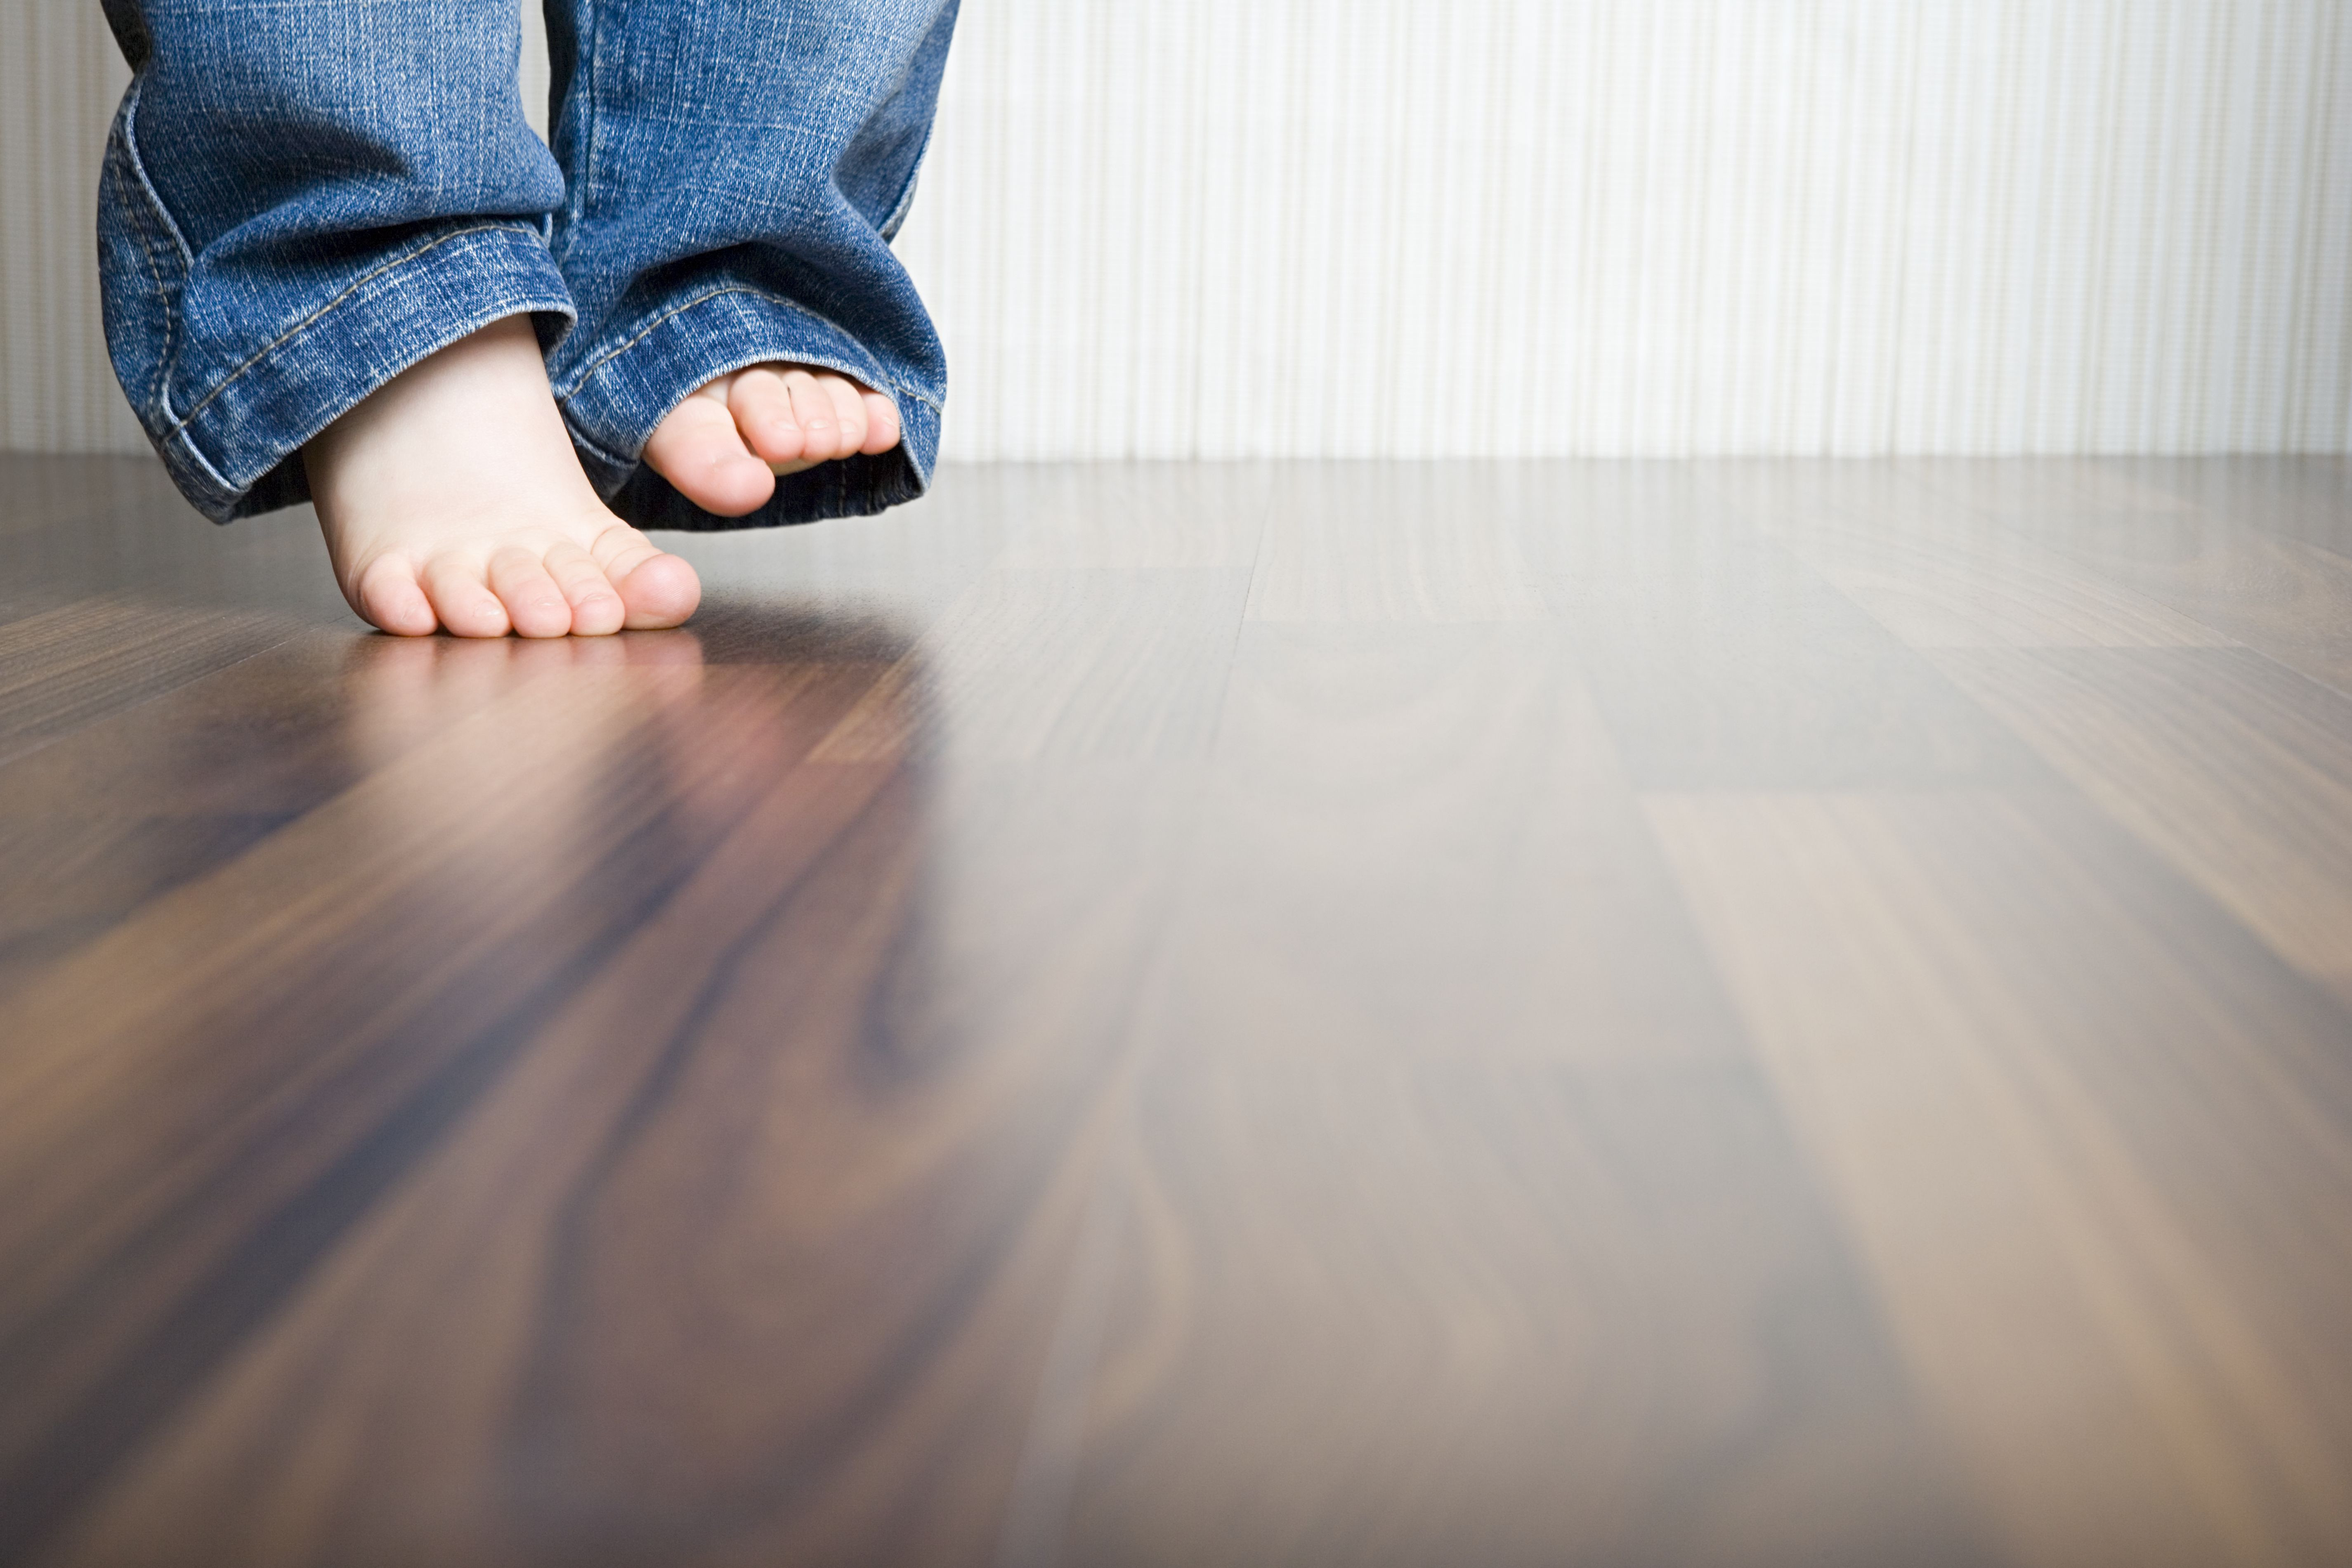 17 Fantastic Cost to Replace Hardwood Floors 2022 free download cost to replace hardwood floors of how to clean hardwood floors best way to clean wood flooring for 1512149908 gettyimages 75403973